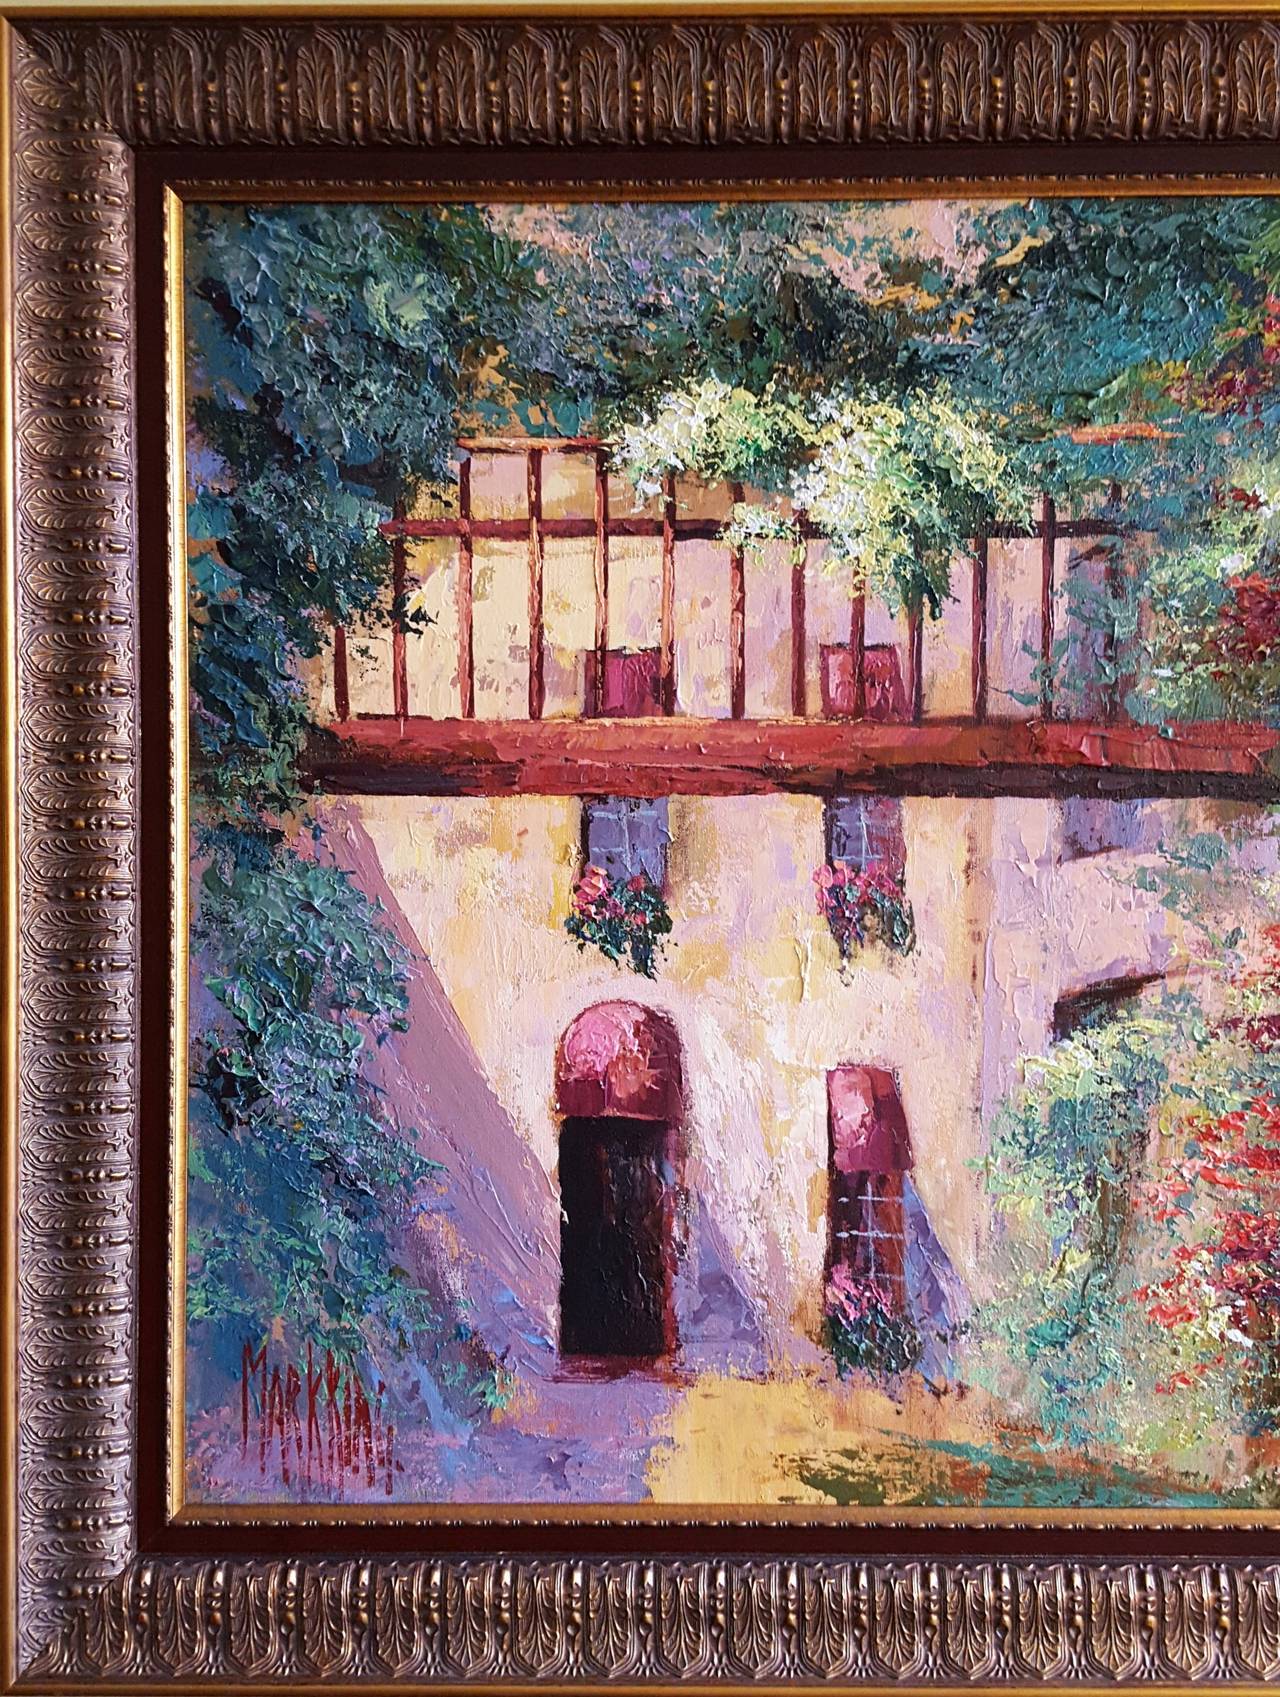 Le Jardin - Impressionist Painting by Mark King